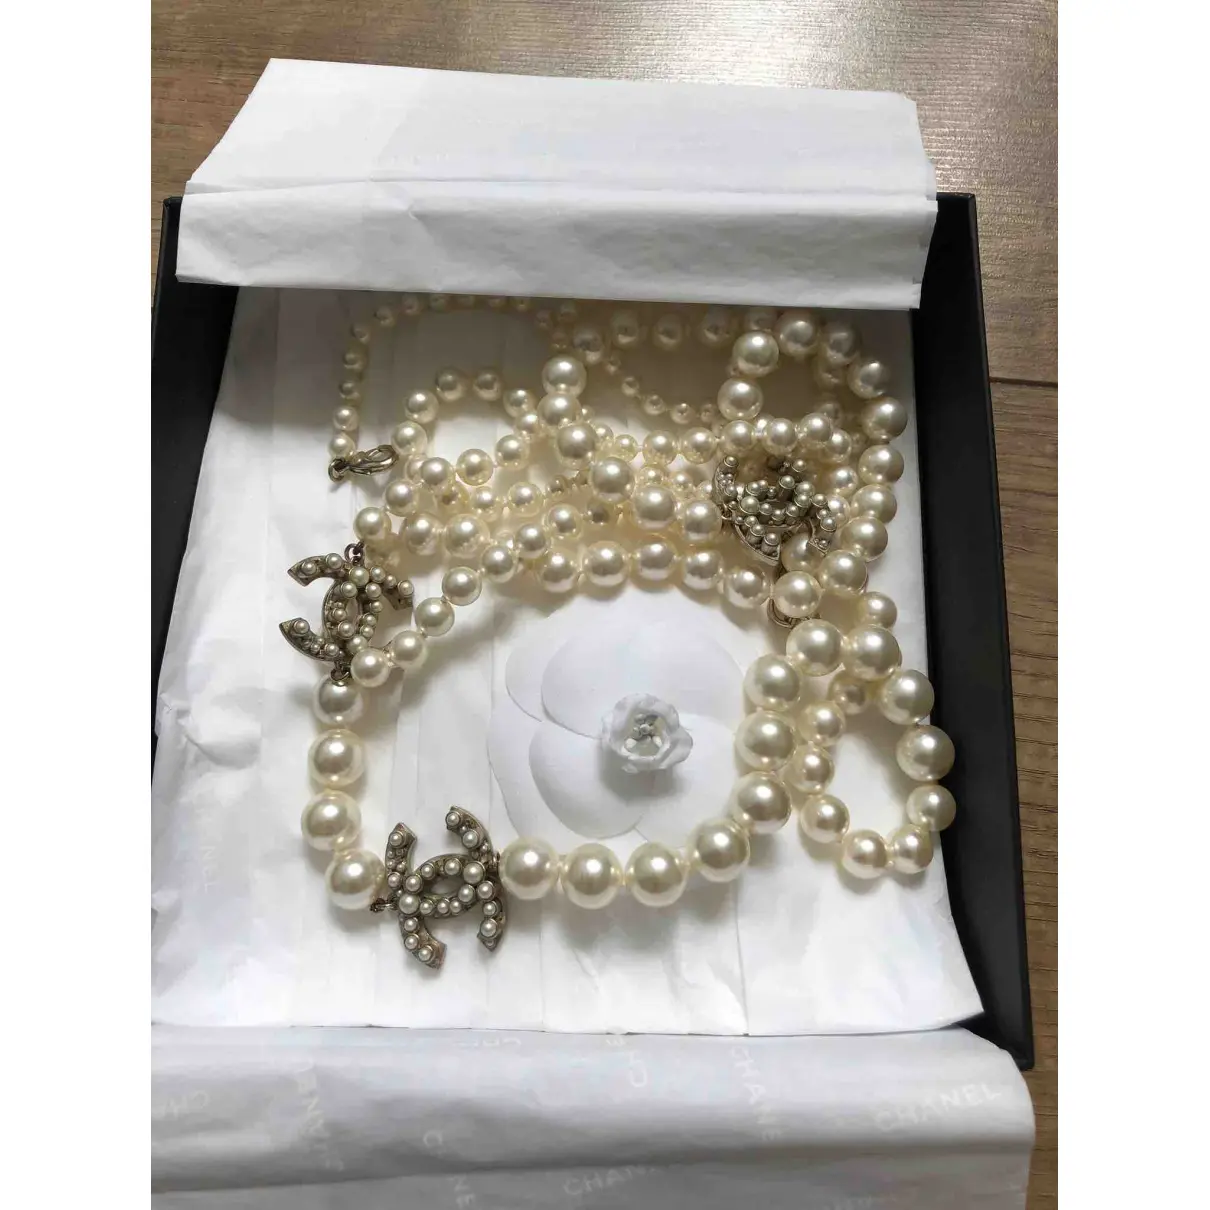 Buy Chanel CC pearls necklace online